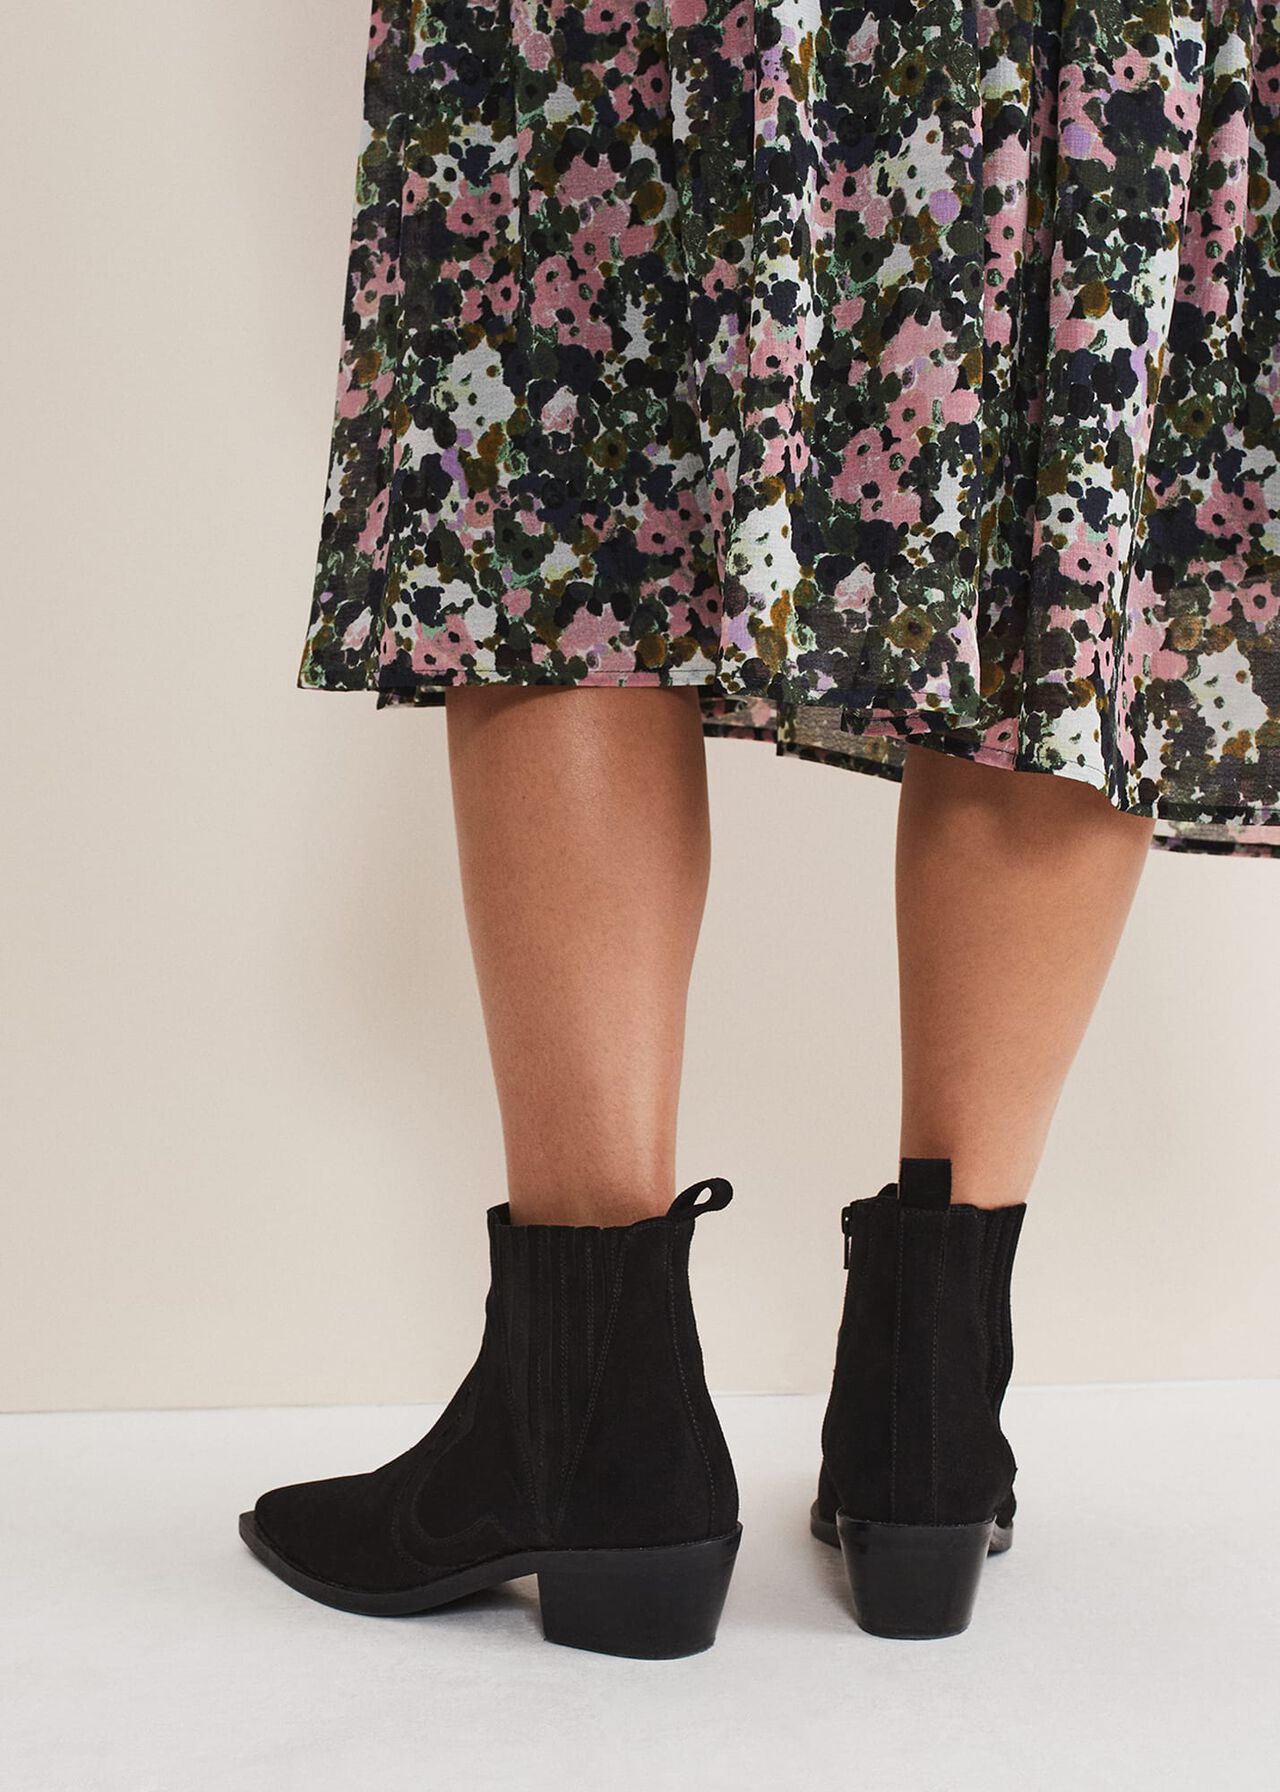 Stitch Detail Suede Ankle Boot